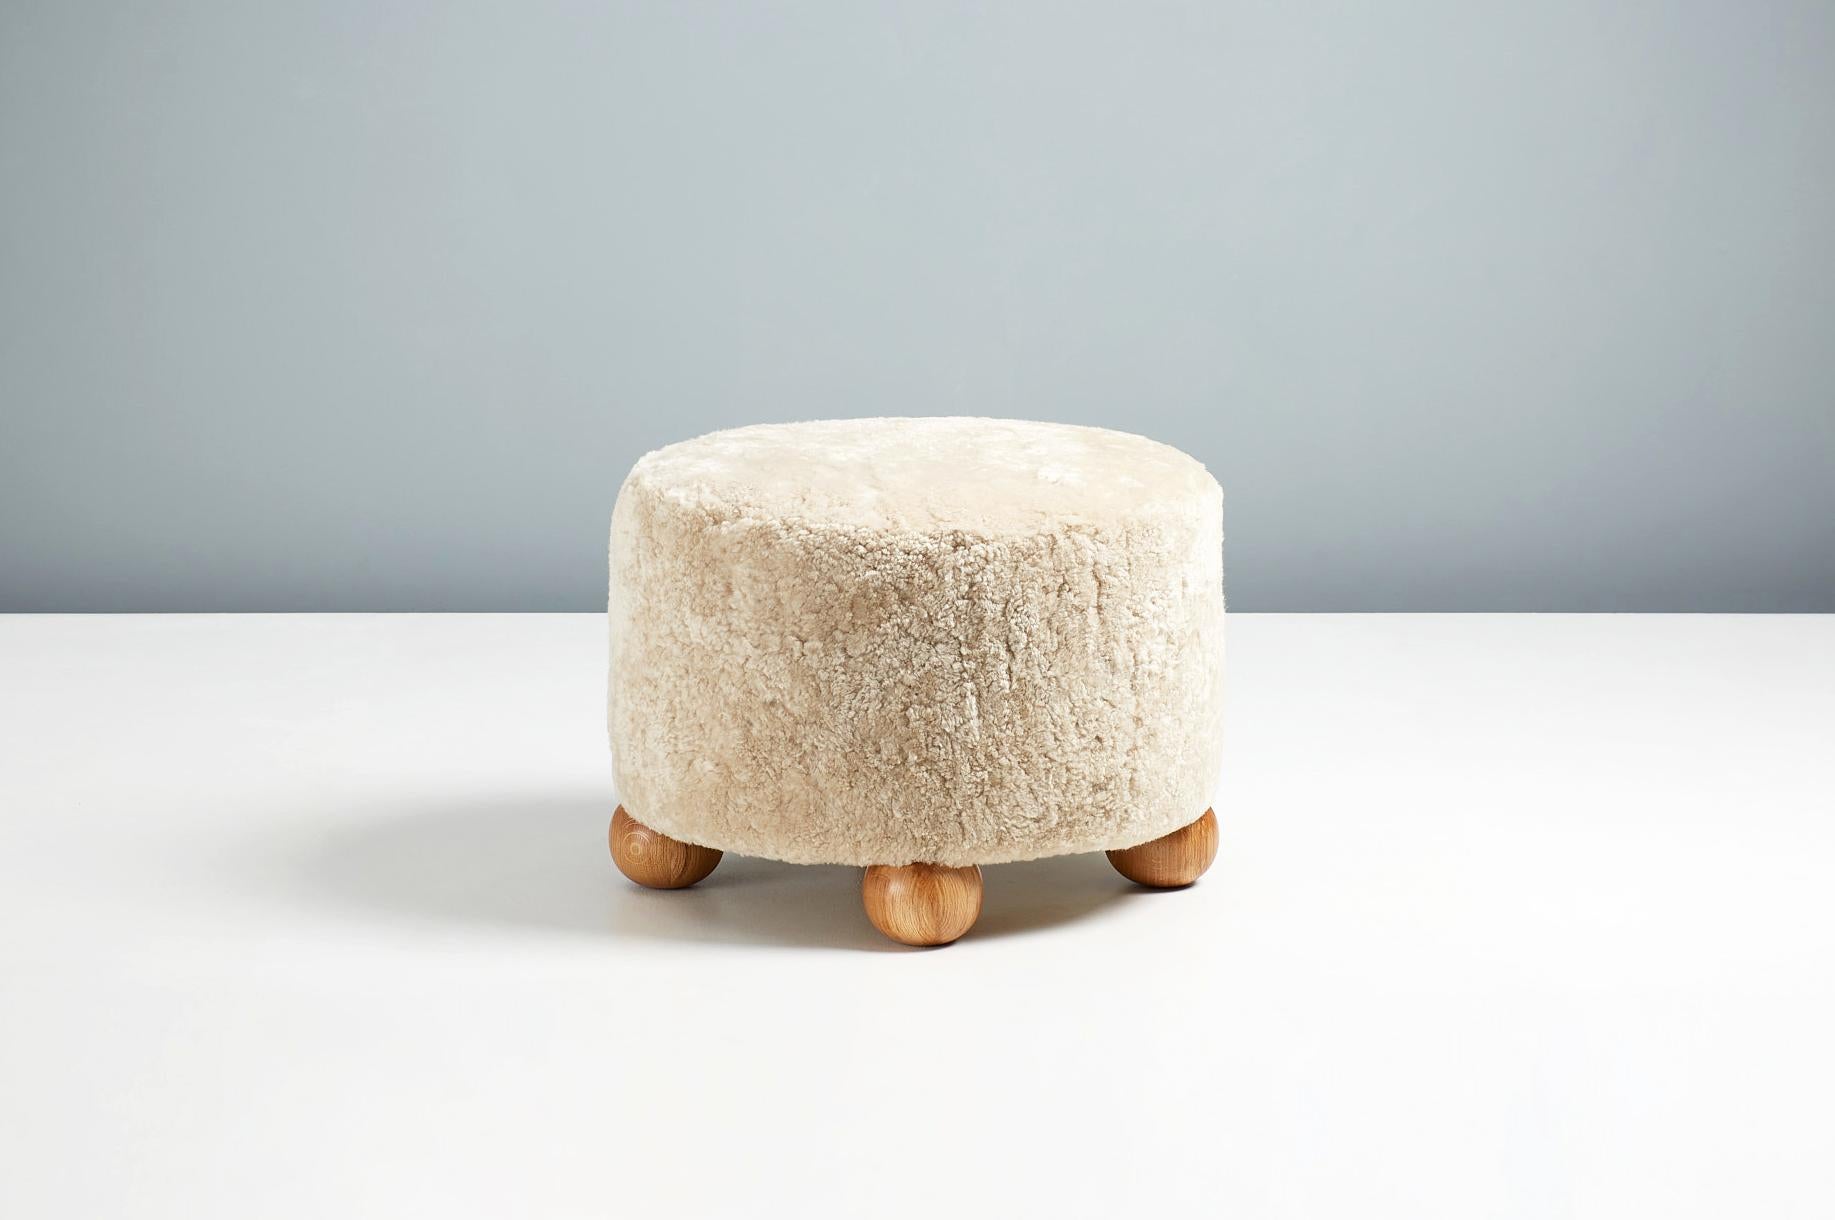 Dagmar Design - Round ottoman 

Custom-made ottomans developed & produced at our workshops in London using the highest quality materials. These examples are upholstered in Moonlight sheepskin with oiled oak ball feet. This ottoman is available to